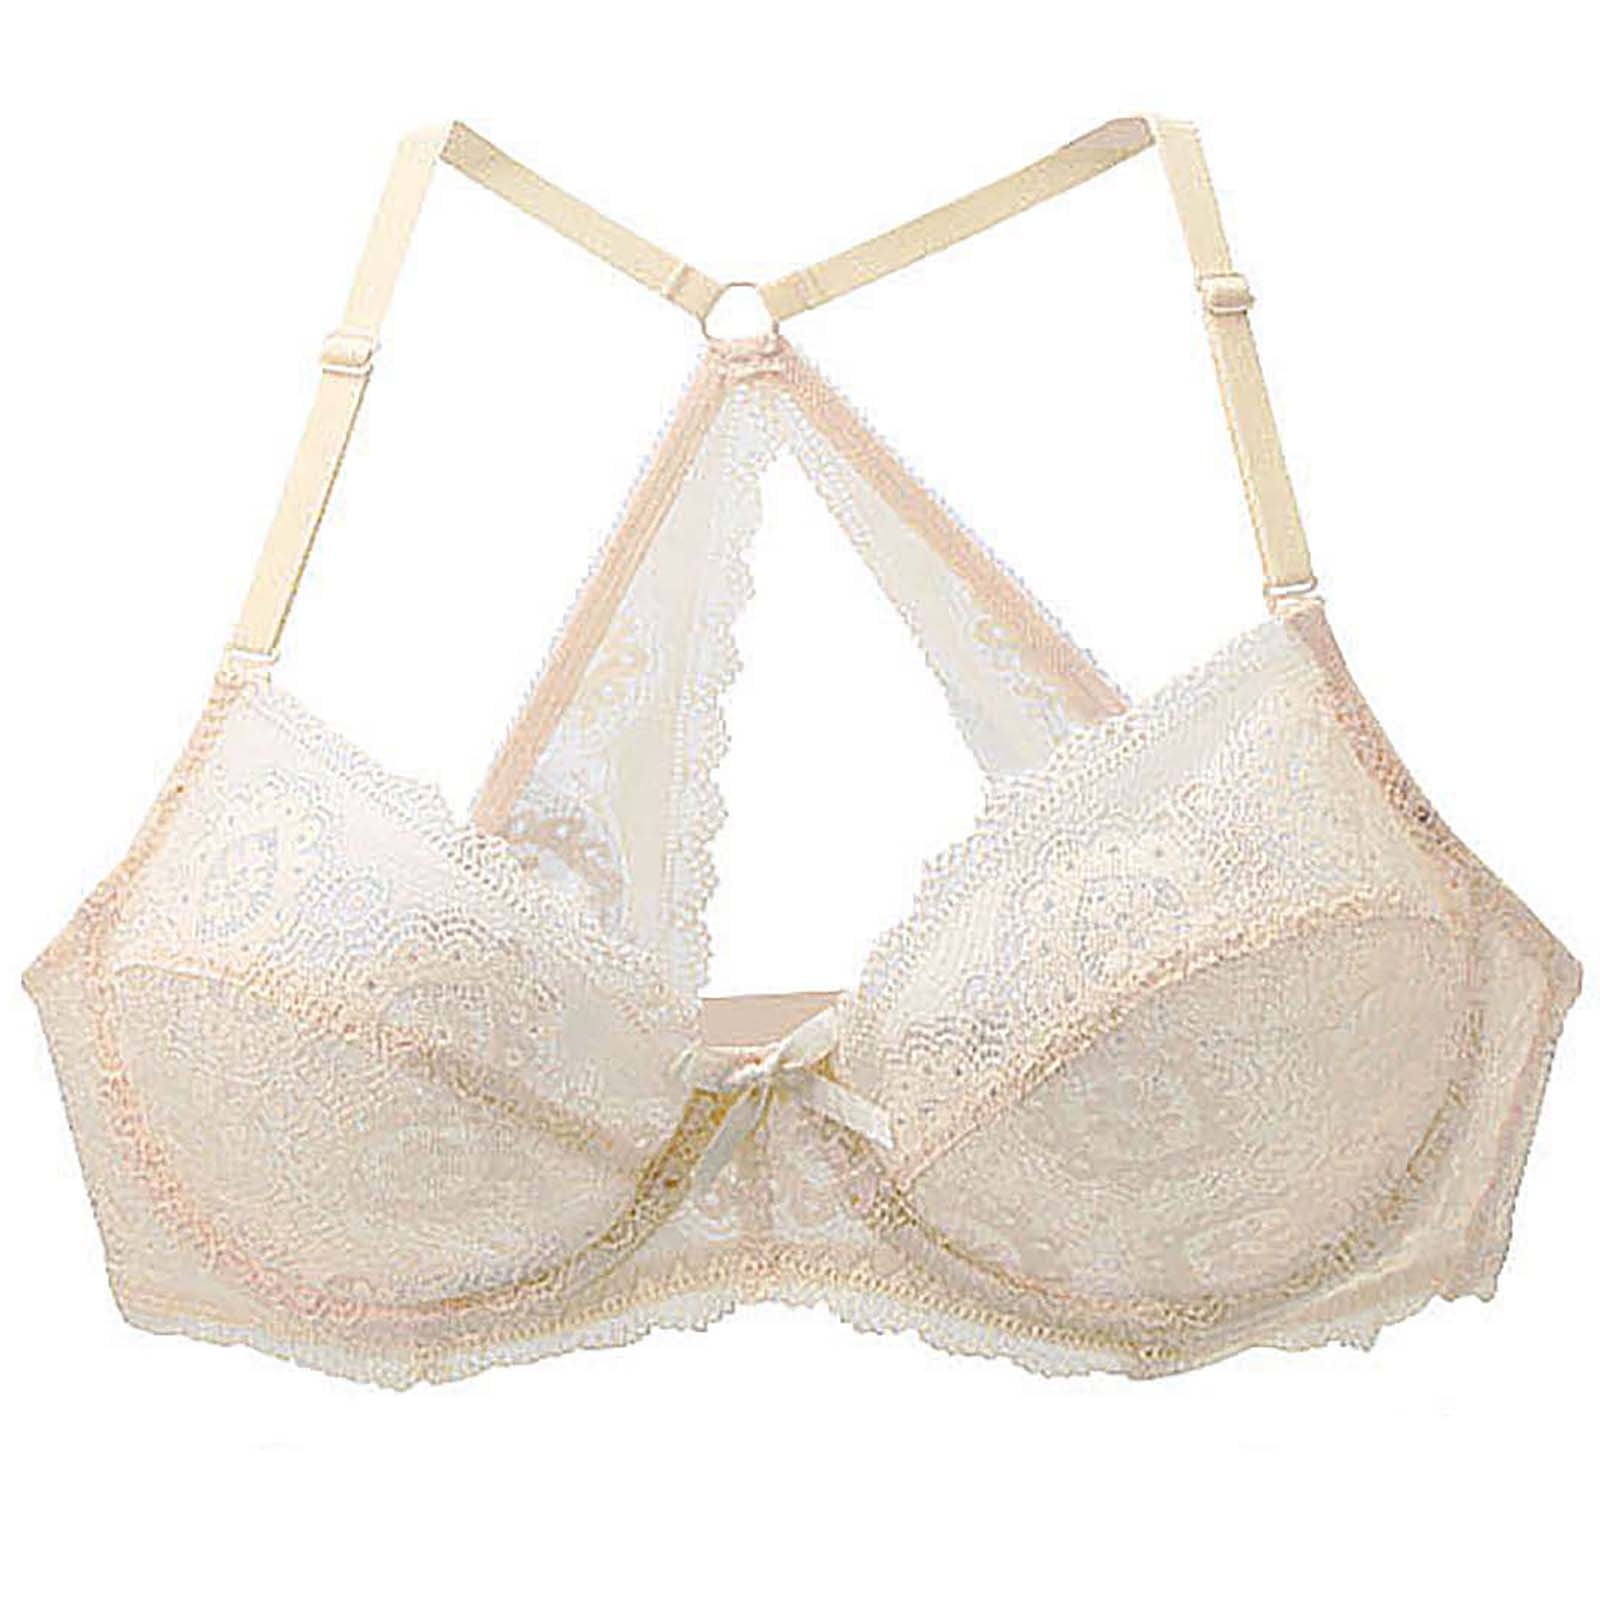 Honey Cream Floral Lace Bralette . Soft Lace Lingerie by Fidditchdesigns 